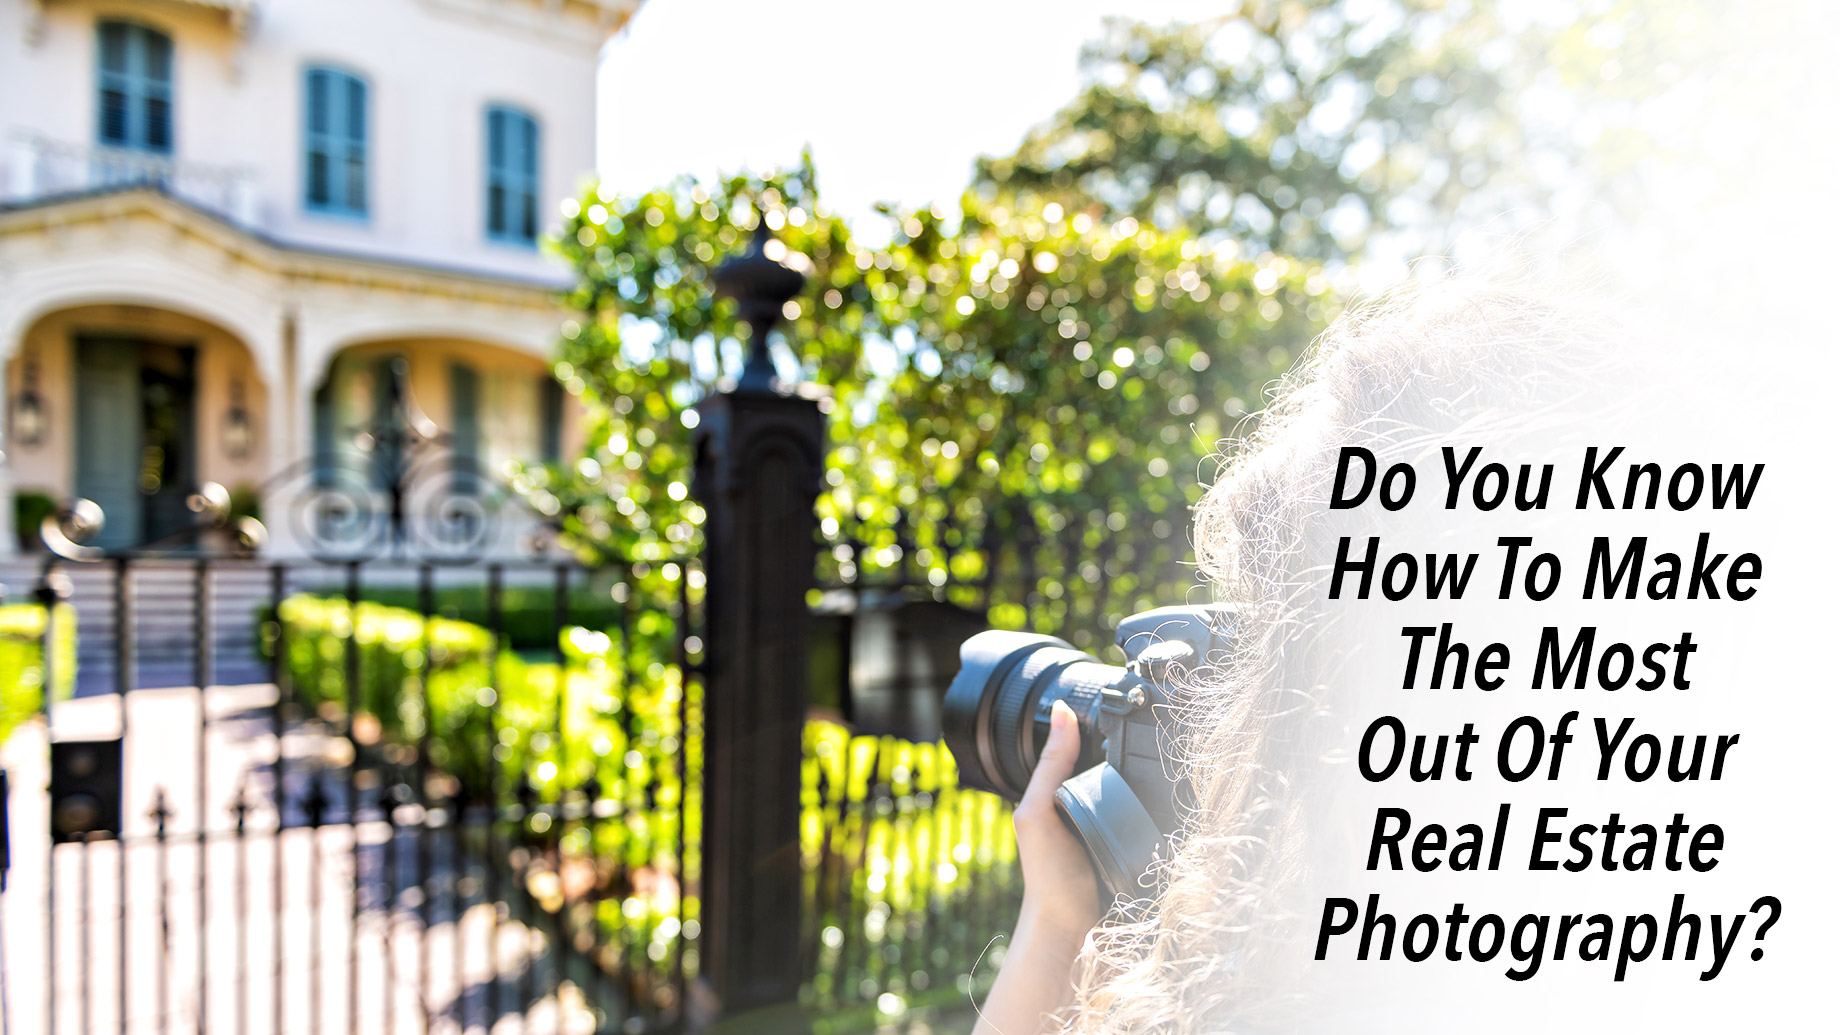 Do You Know How To Make The Most Out Of Your Real Estate Photography?